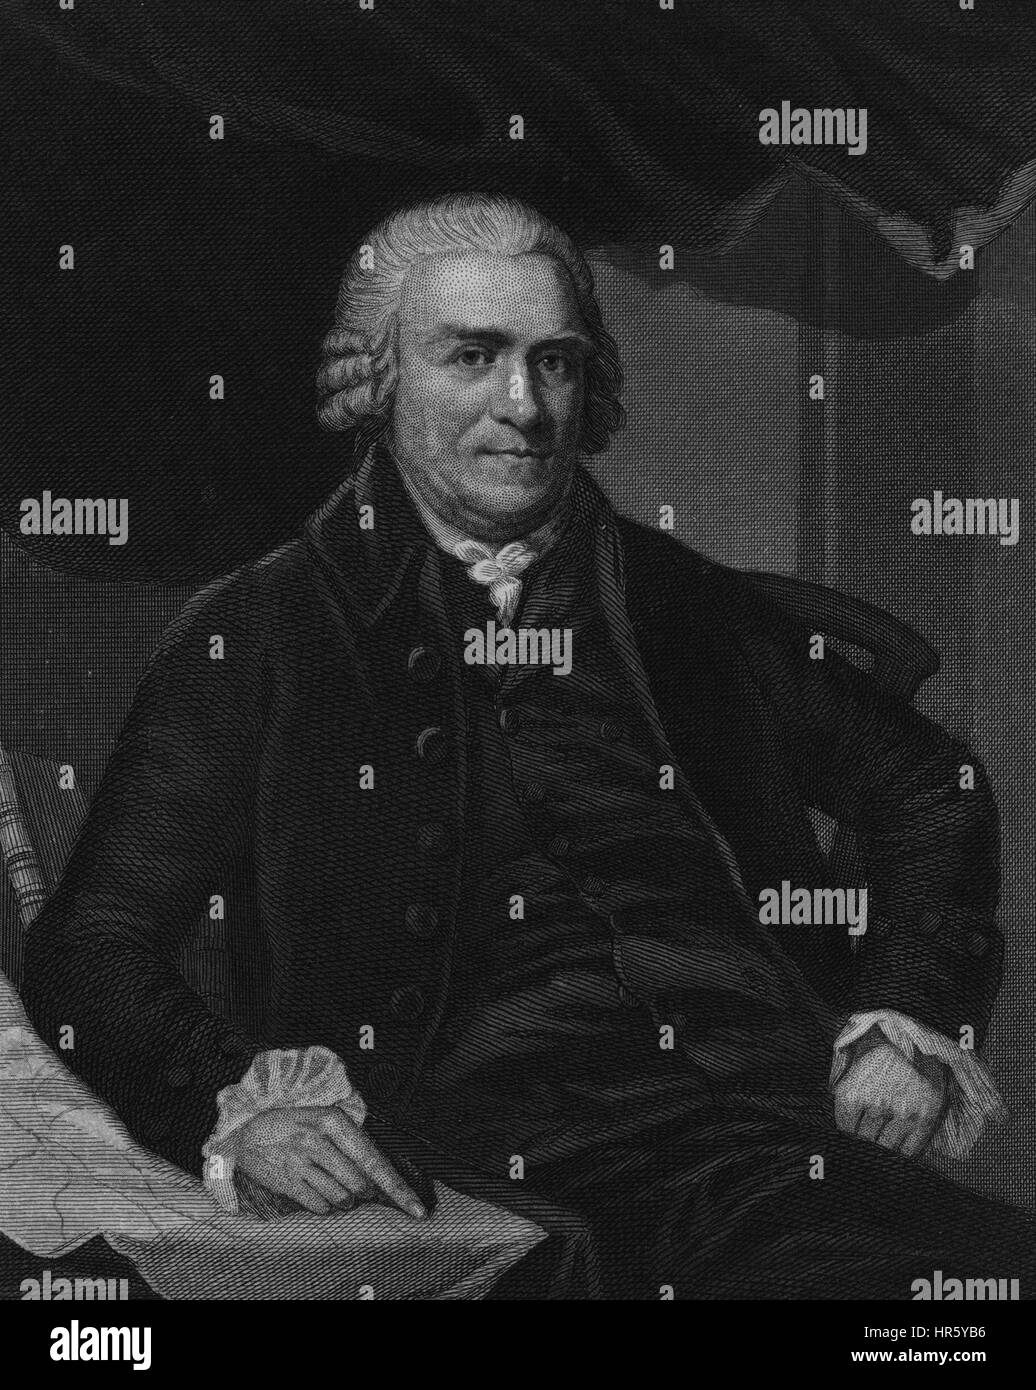 Portrait of Samuel Adams, political philosopher and founding father of the United States, by Henry Bryan Hall, 1770. From the New York Public Library. Stock Photo